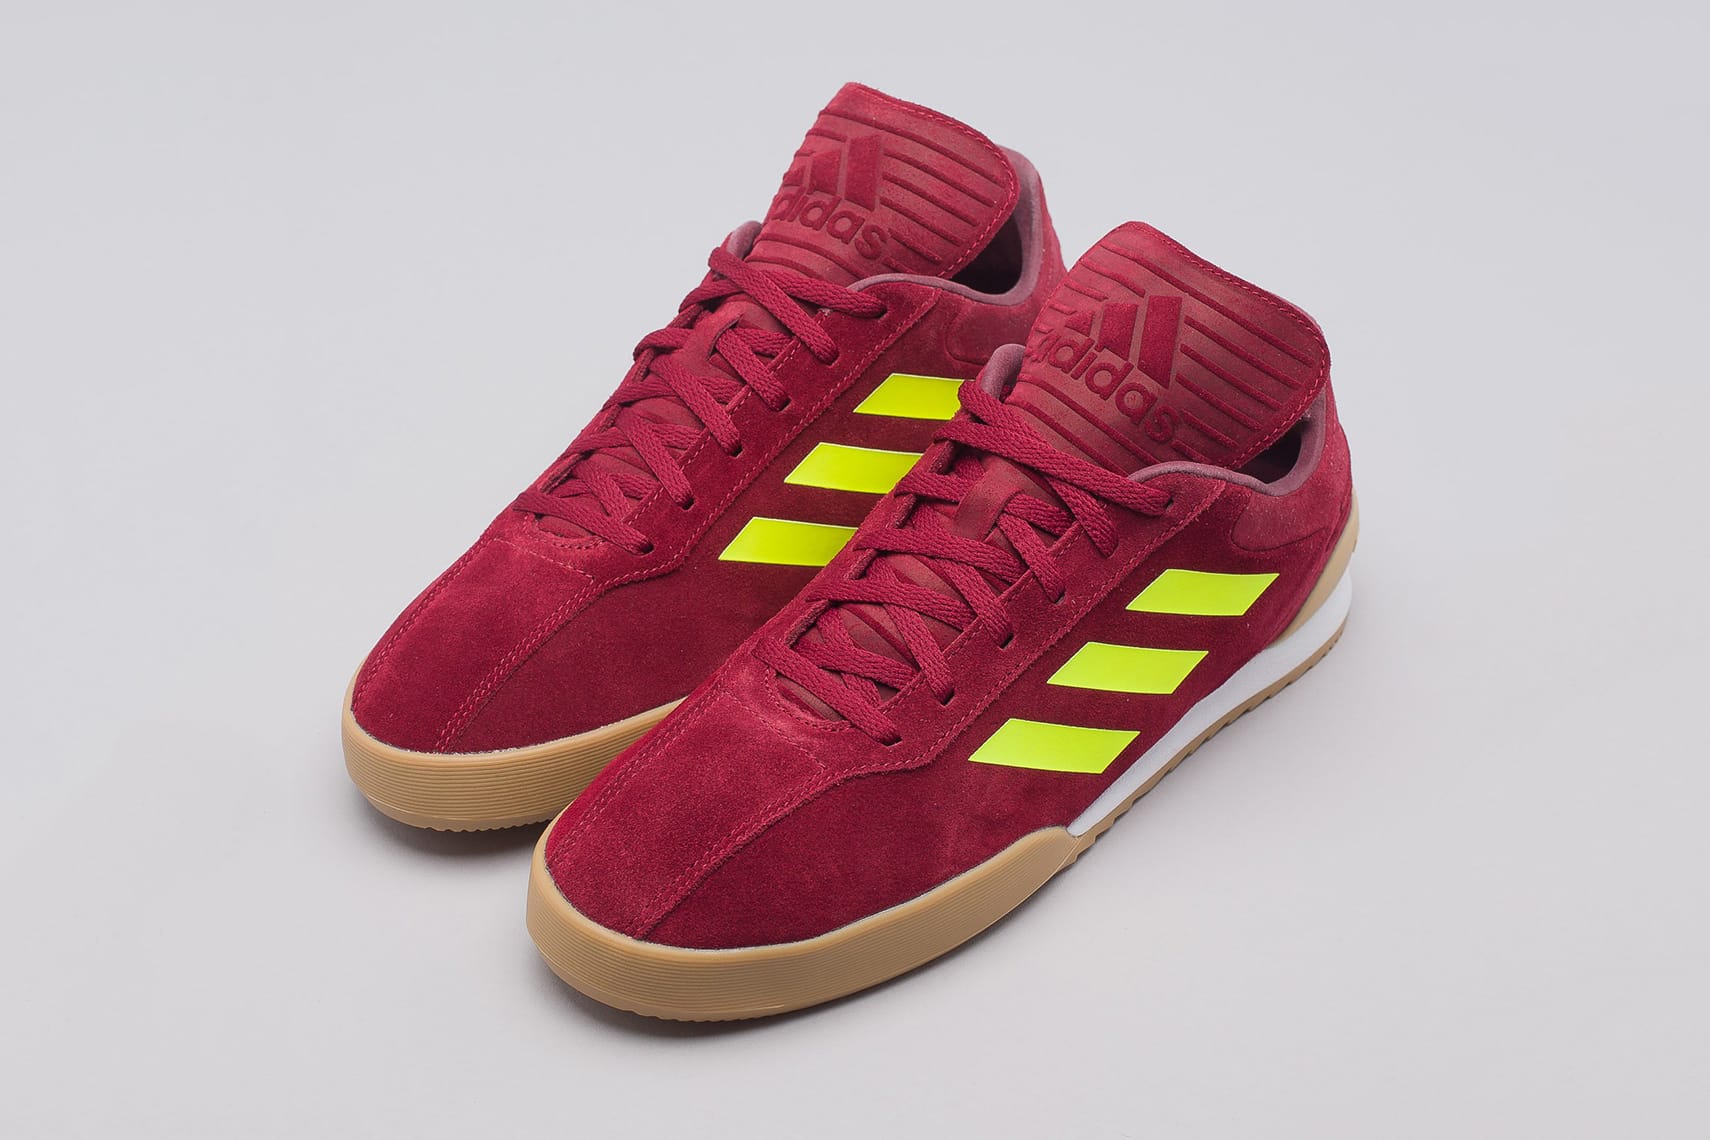 adidas copa trainers red